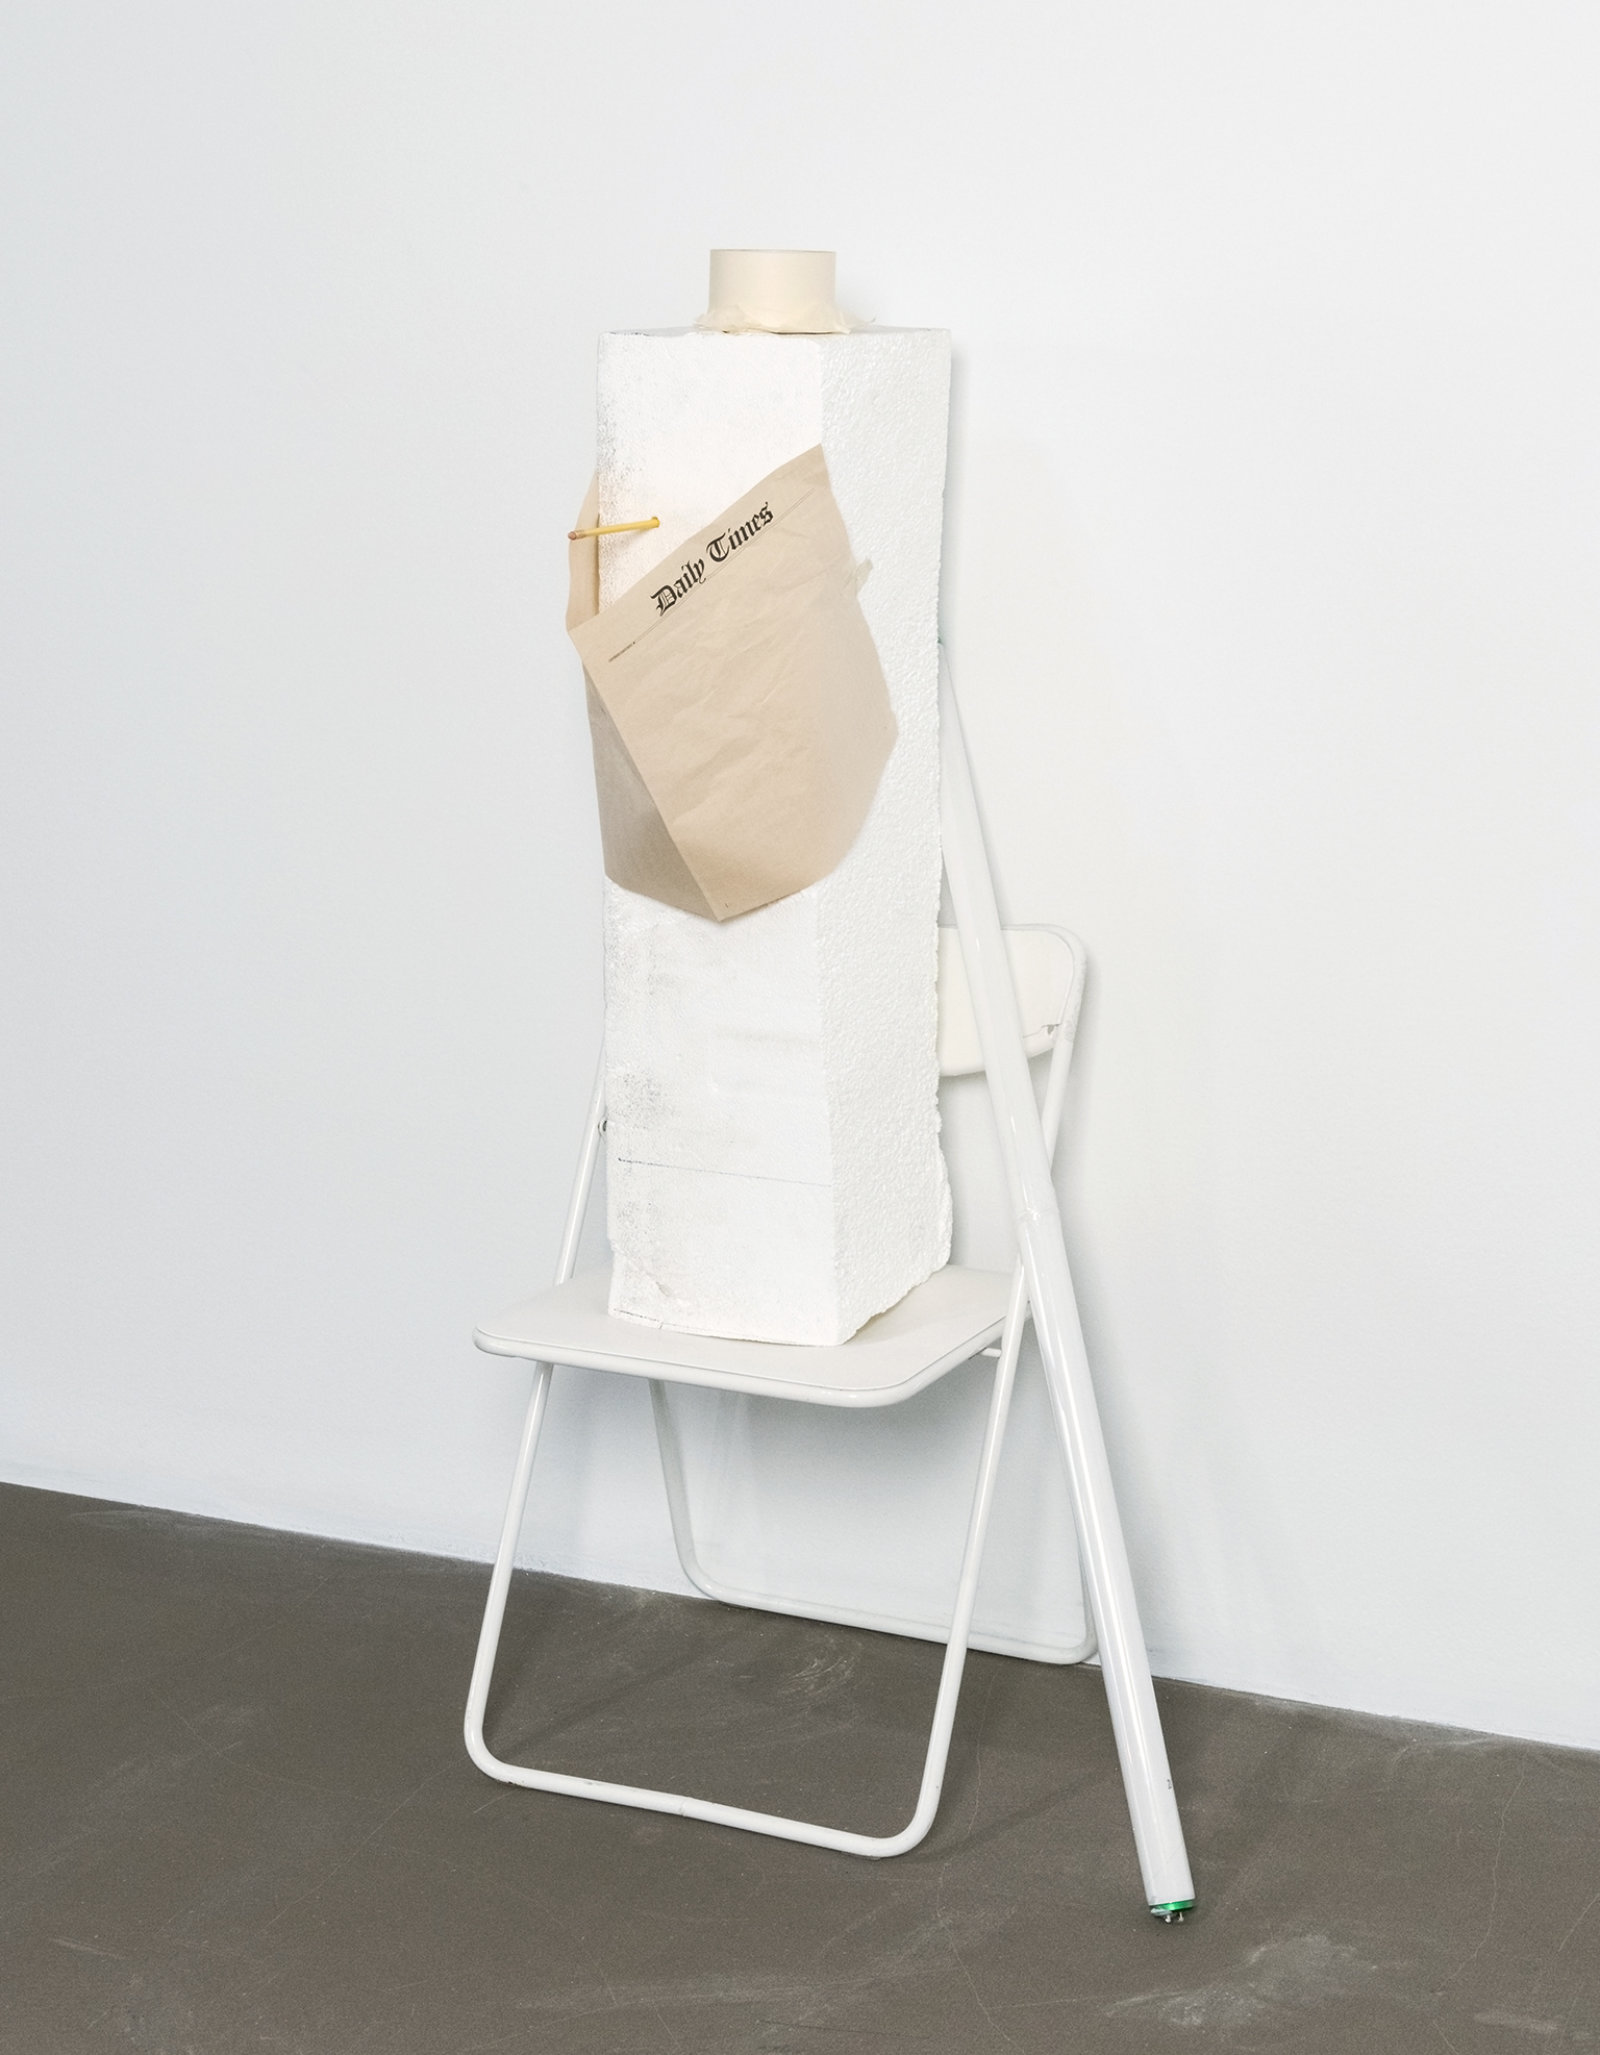 Geoffrey Farmer, I am by nature one and also many, dividing the single me into many, and even opposing them as great and small, light and dark, and in ten thousand other ways (I know what it is like to fall), 2006–2008, white chair, styrofoam, newspaper, tape, pencil, fluorescent bulb, 58 x 21 x 18 in. (147 x 53 x 46 cm)